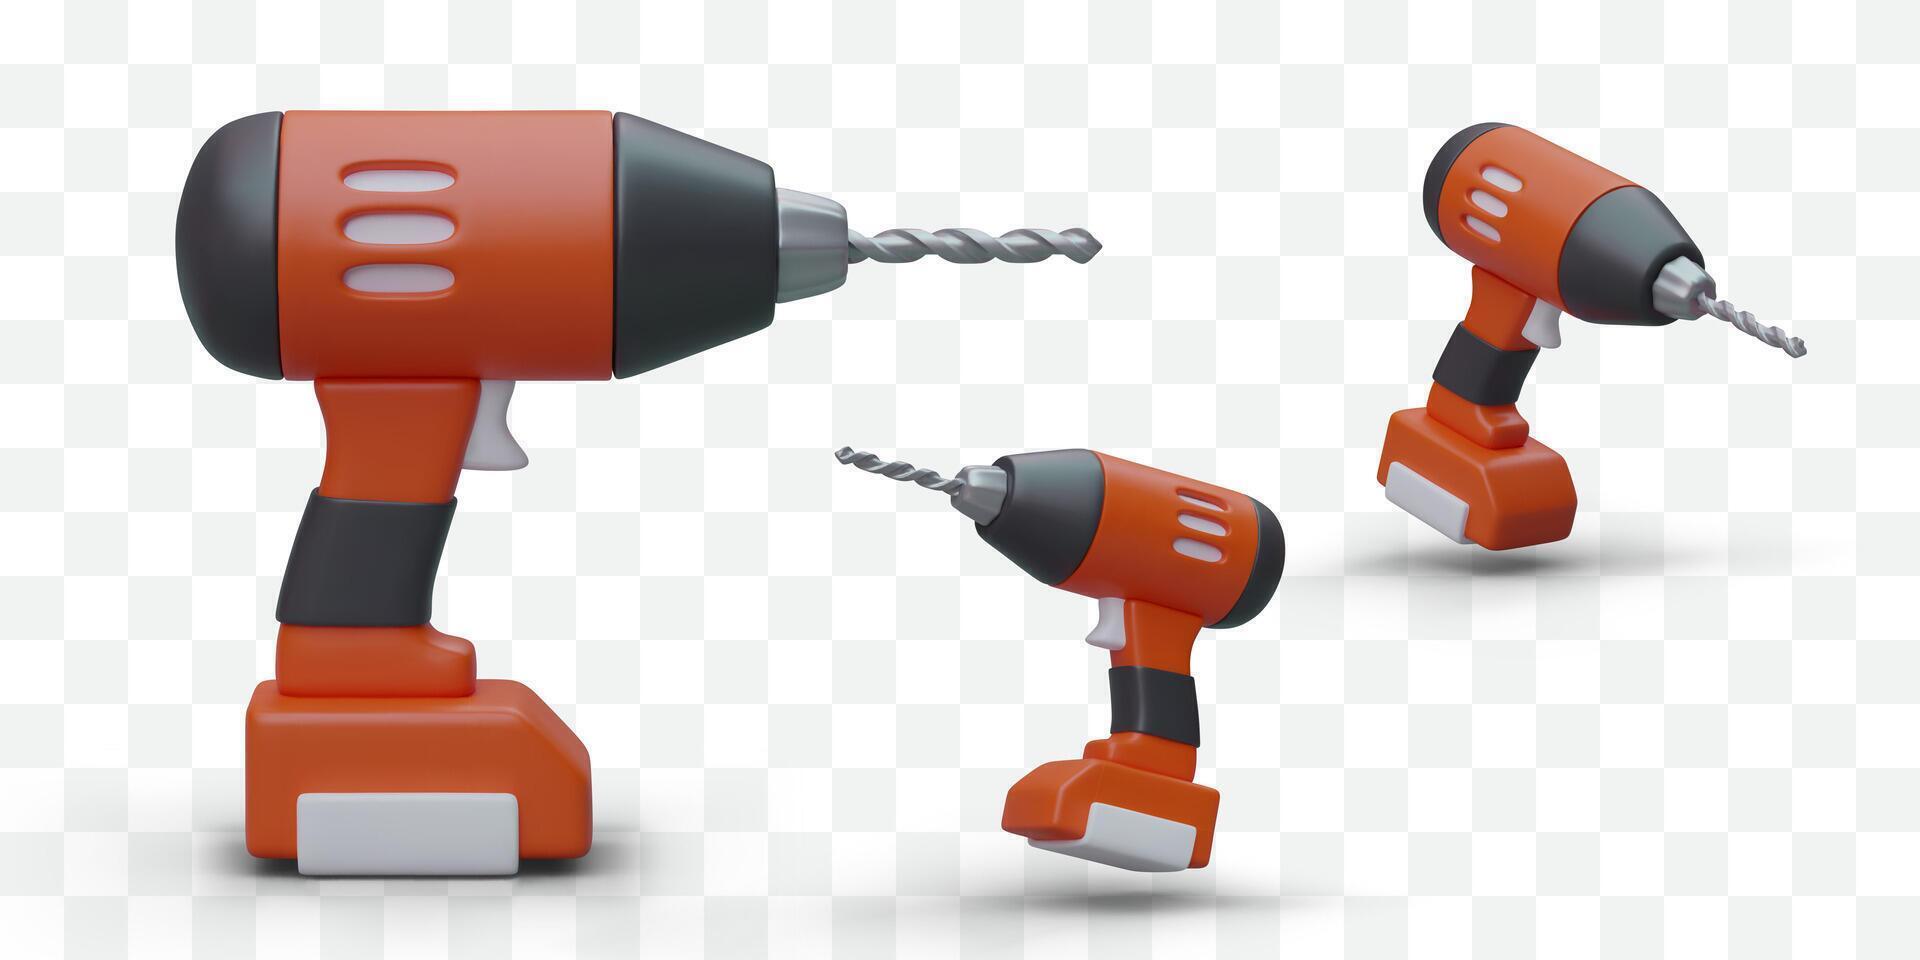 Set of realistic electric drills. 3D hand drilling machine, side, top, bottom view vector